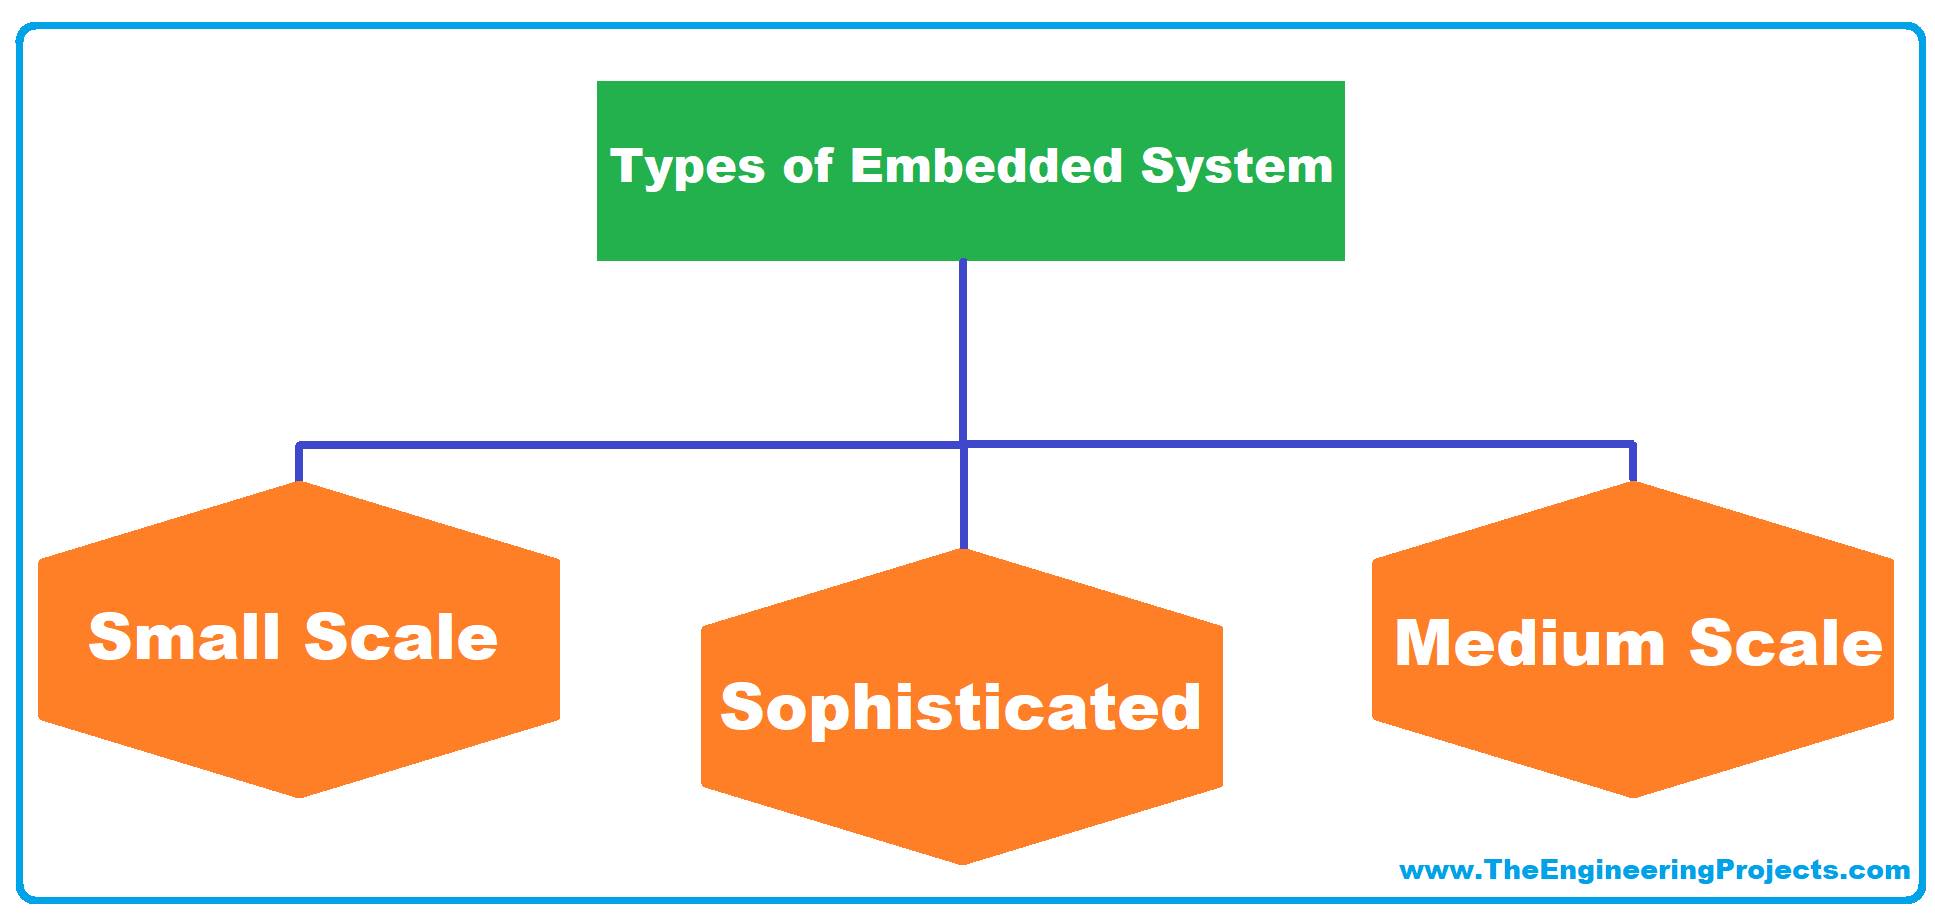 embedded system, embedded systems, what is embedded system, what is an embedded system, types of embedded system, embedded systems types